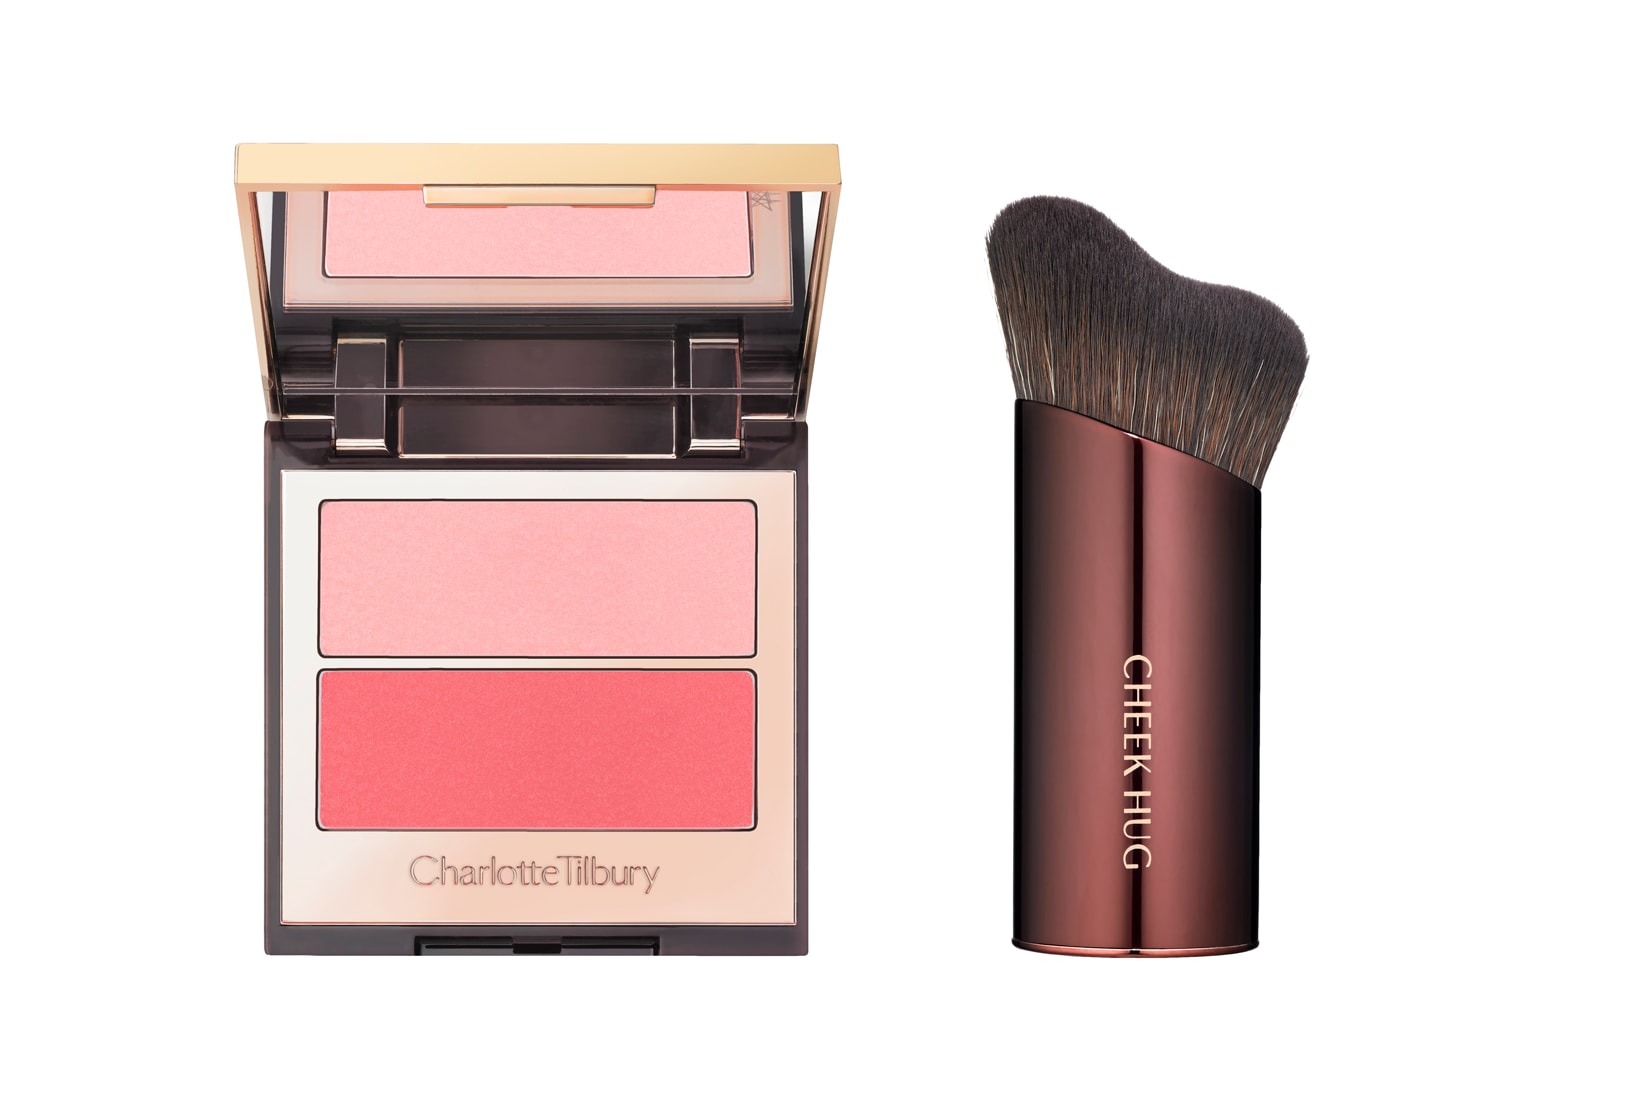 Charlotte Tilbury Beauty Filter Collection Pretty Youth Glow Filter Pretty Fresh With Brush